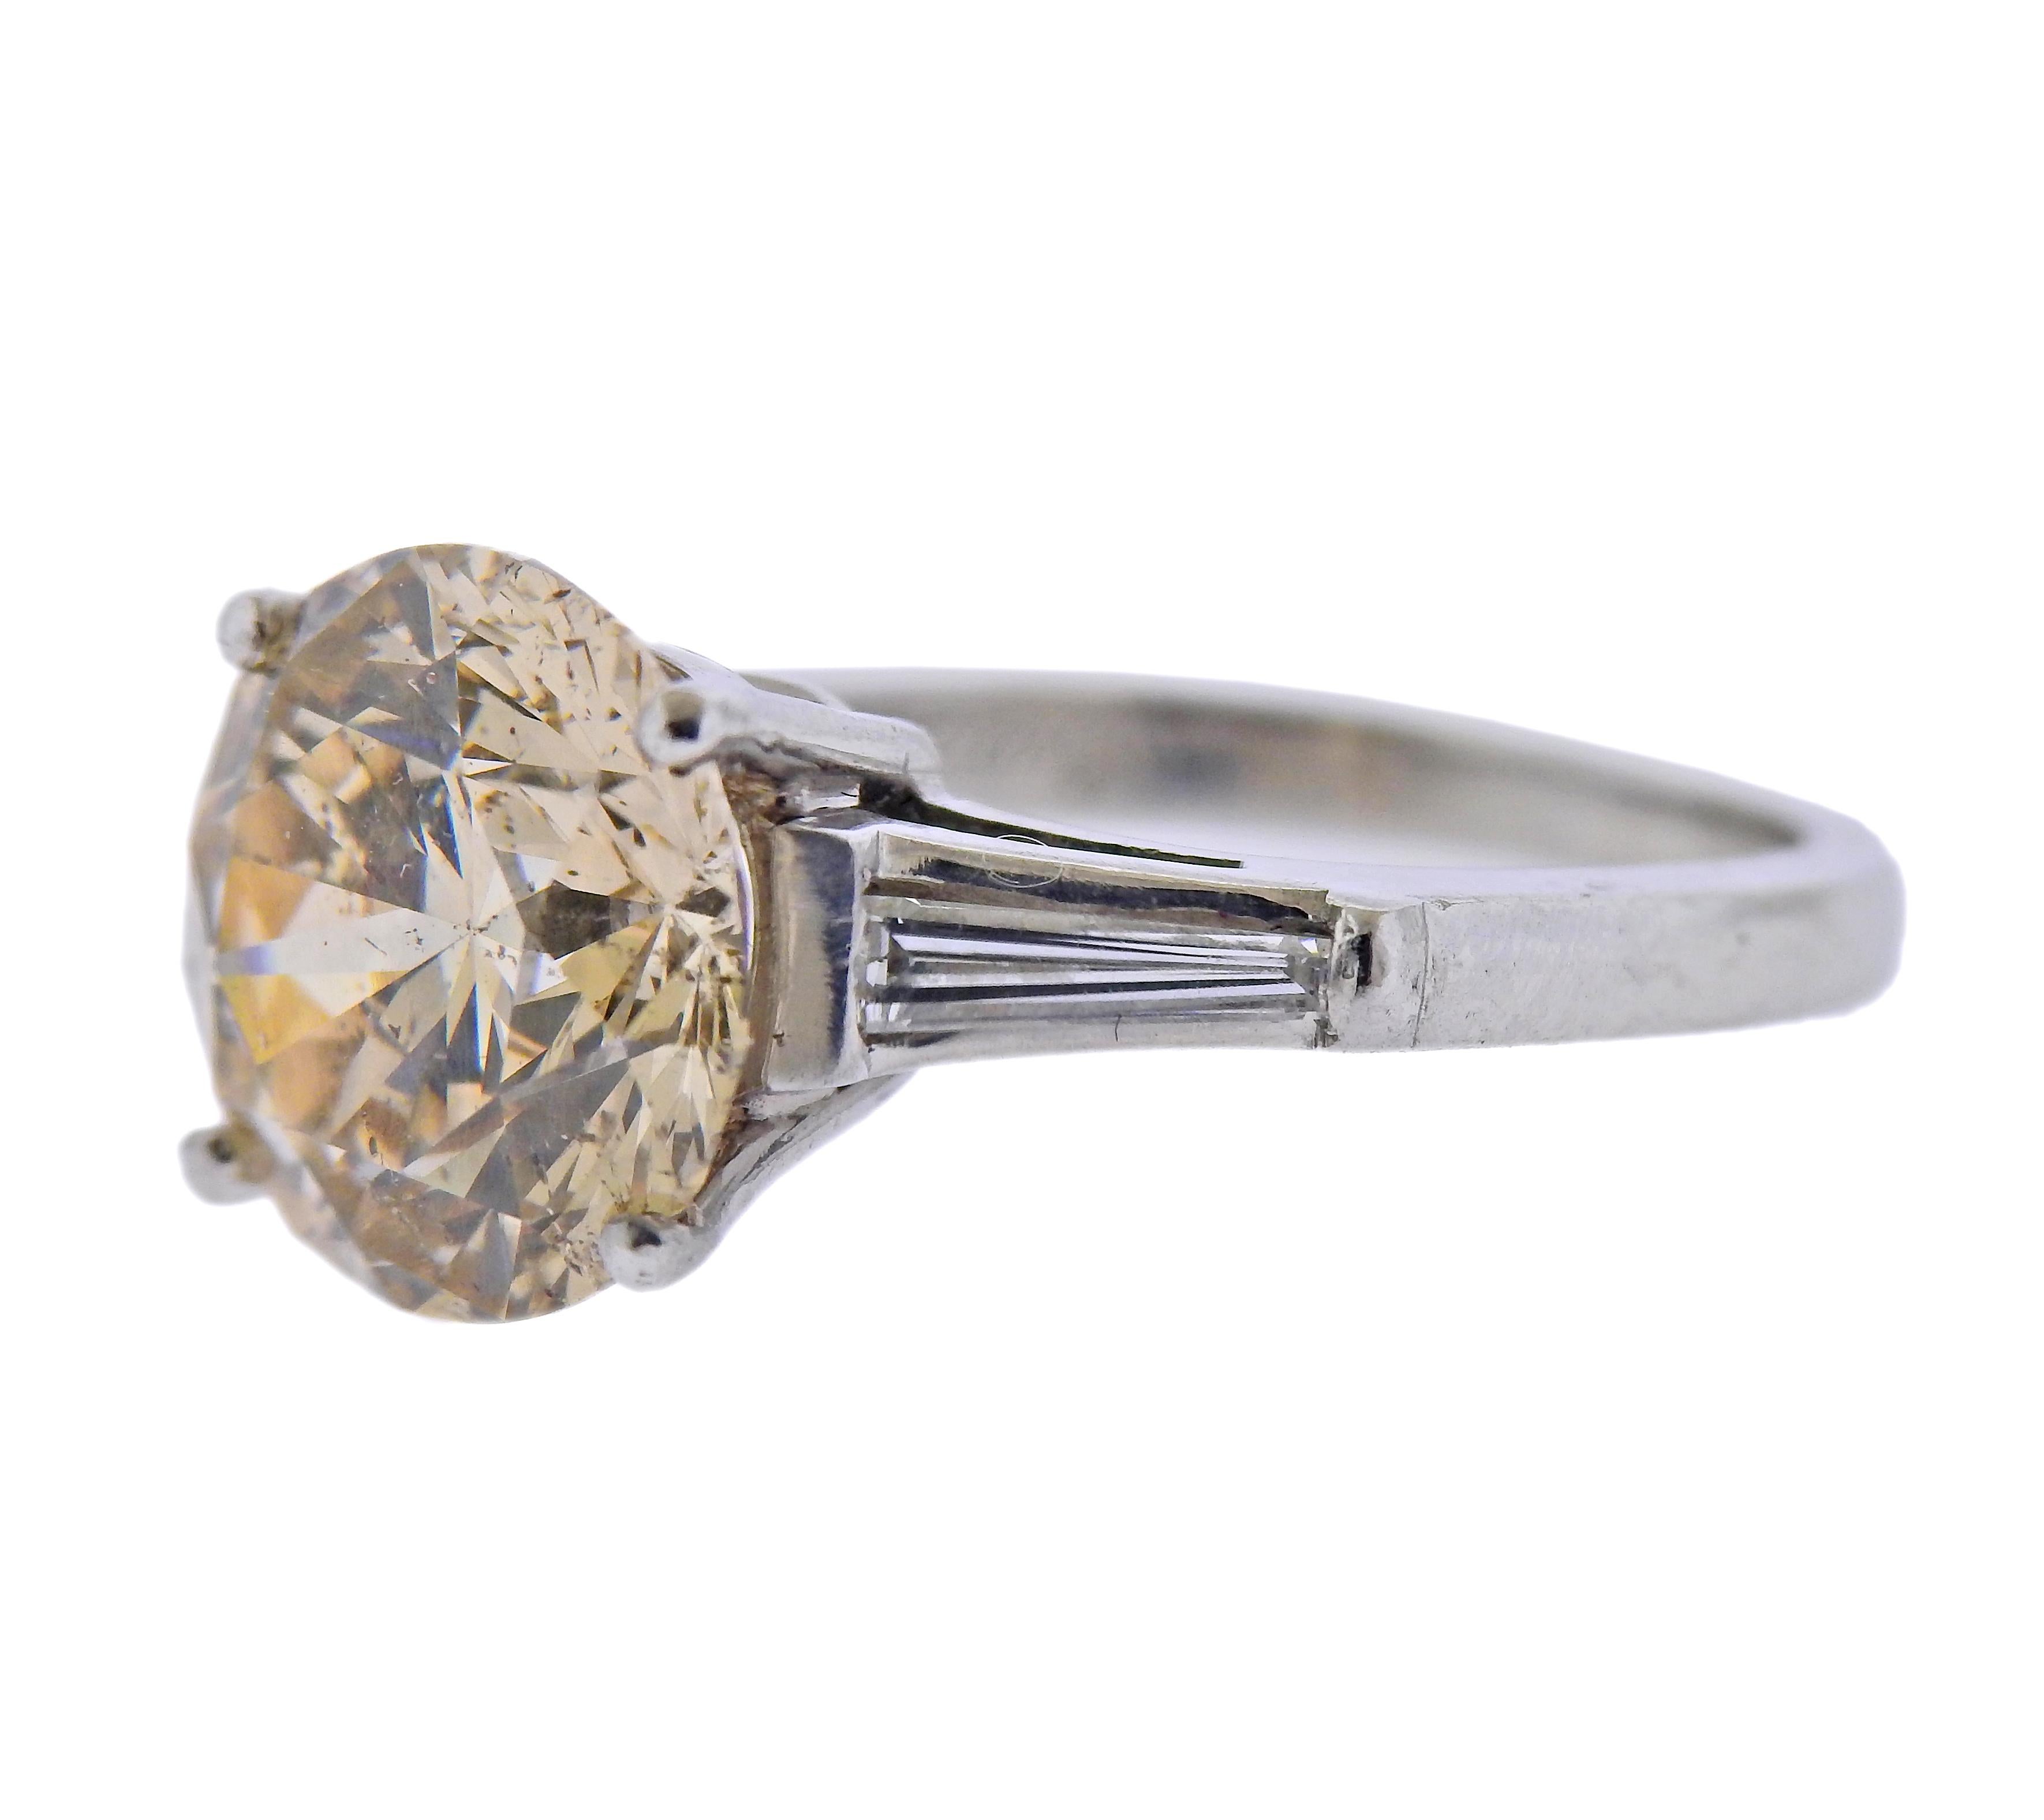 Long's platinum engagement ring, set with center 4.55ct faint brown diamond, set with two tapered baguettes on sides. Ring size - 5. Marked: Long's, pt900. Weight - 7 grams.